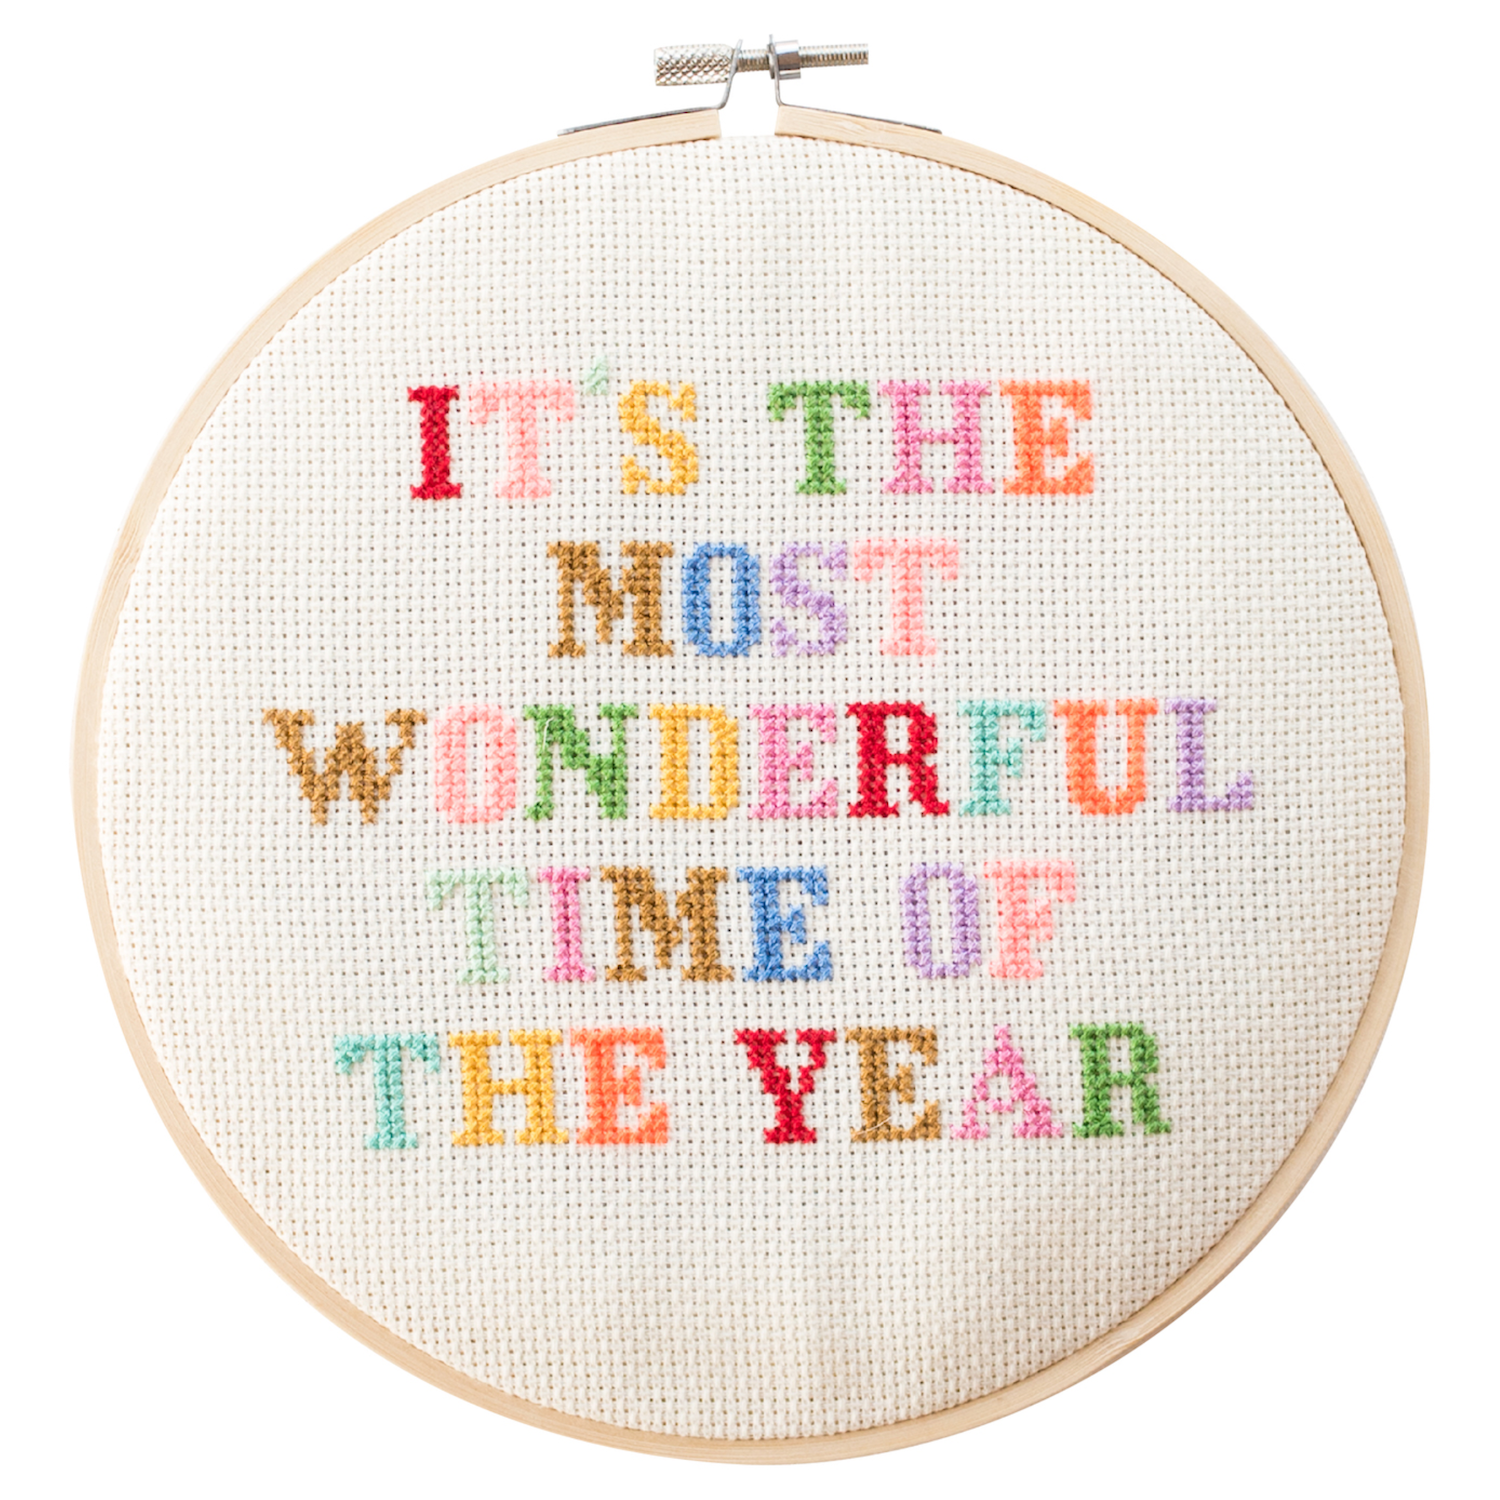 Most Wonderful Time of the Year Cross Stitch on White